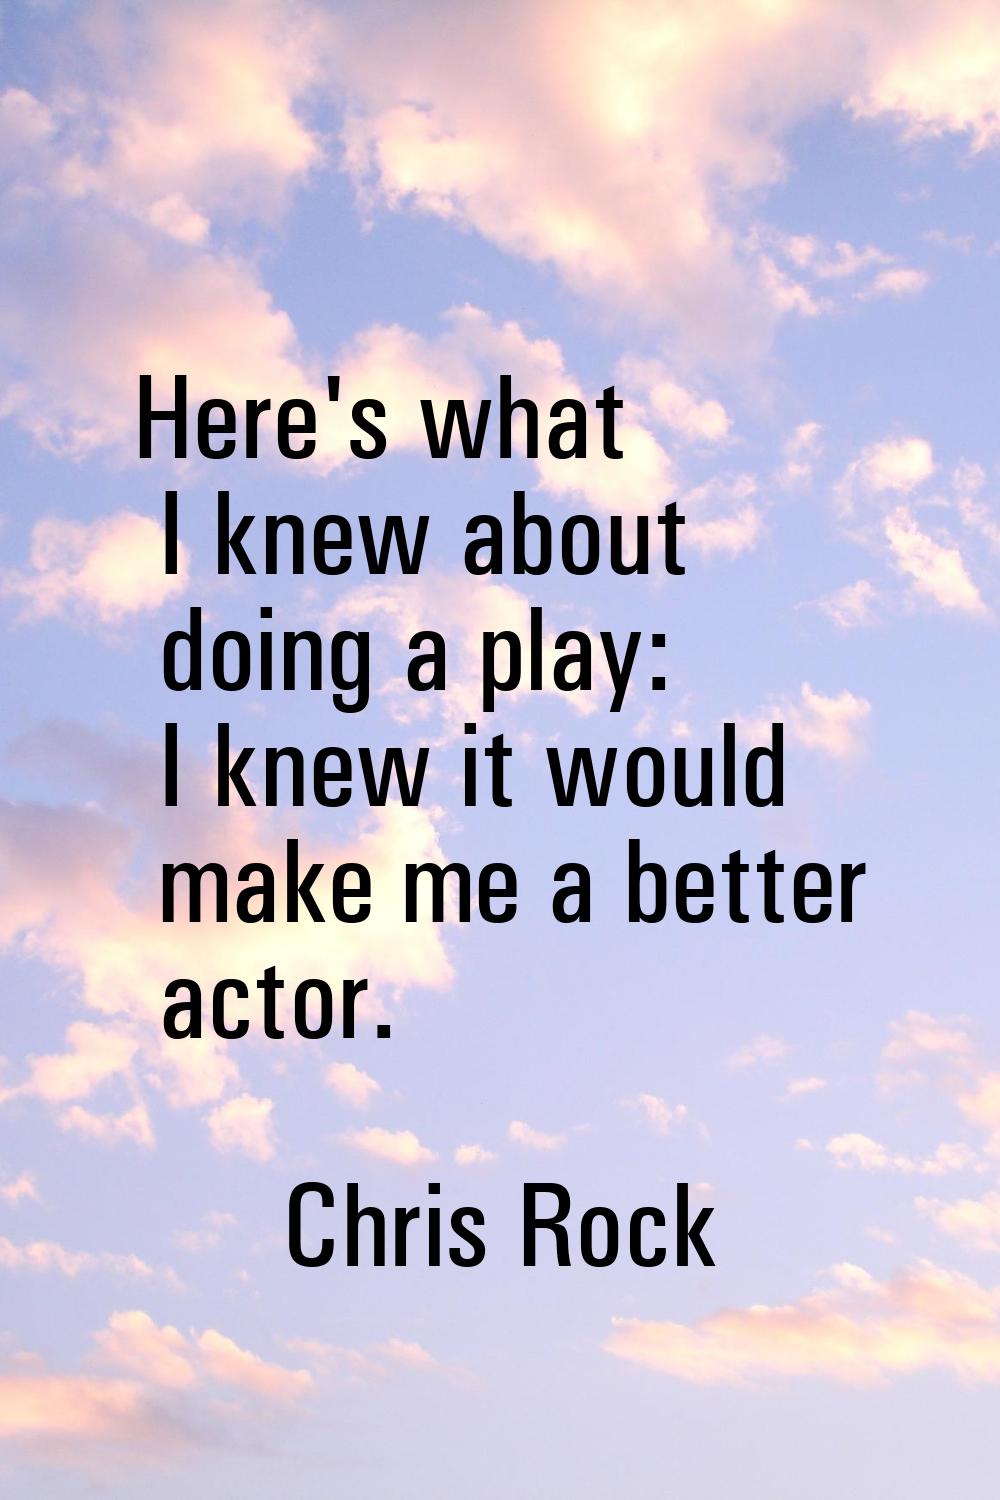 Here's what I knew about doing a play: I knew it would make me a better actor.